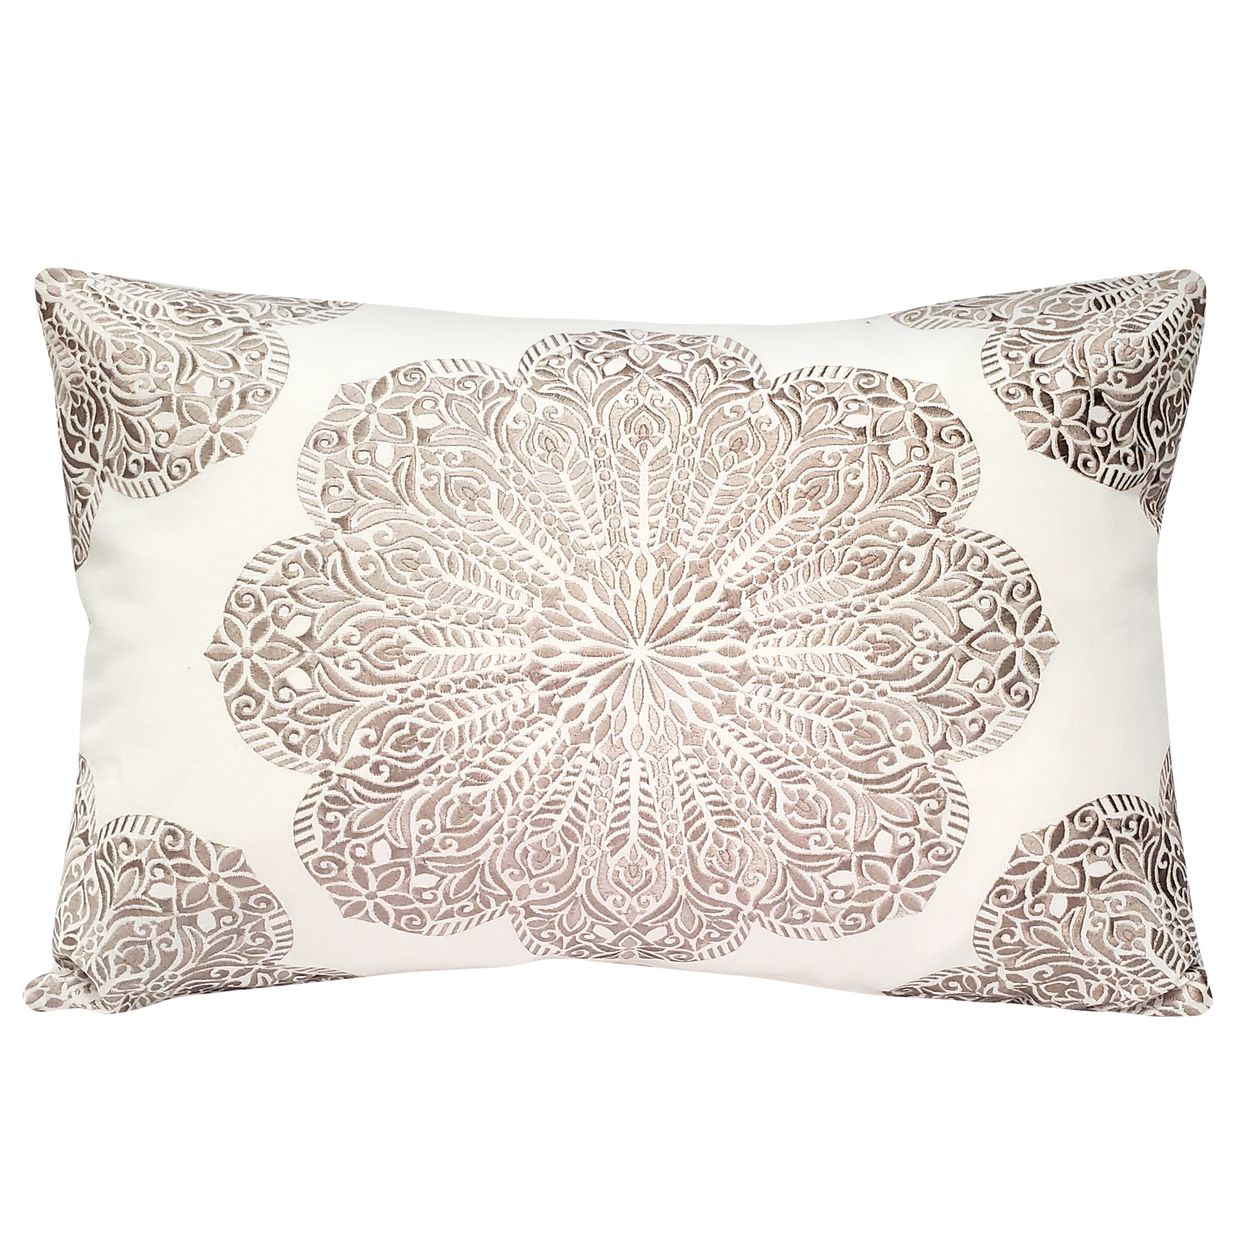 Mancini Cream And Sand Medallion Embroidered Throw Pillow 16x24, With Polyfill Insert